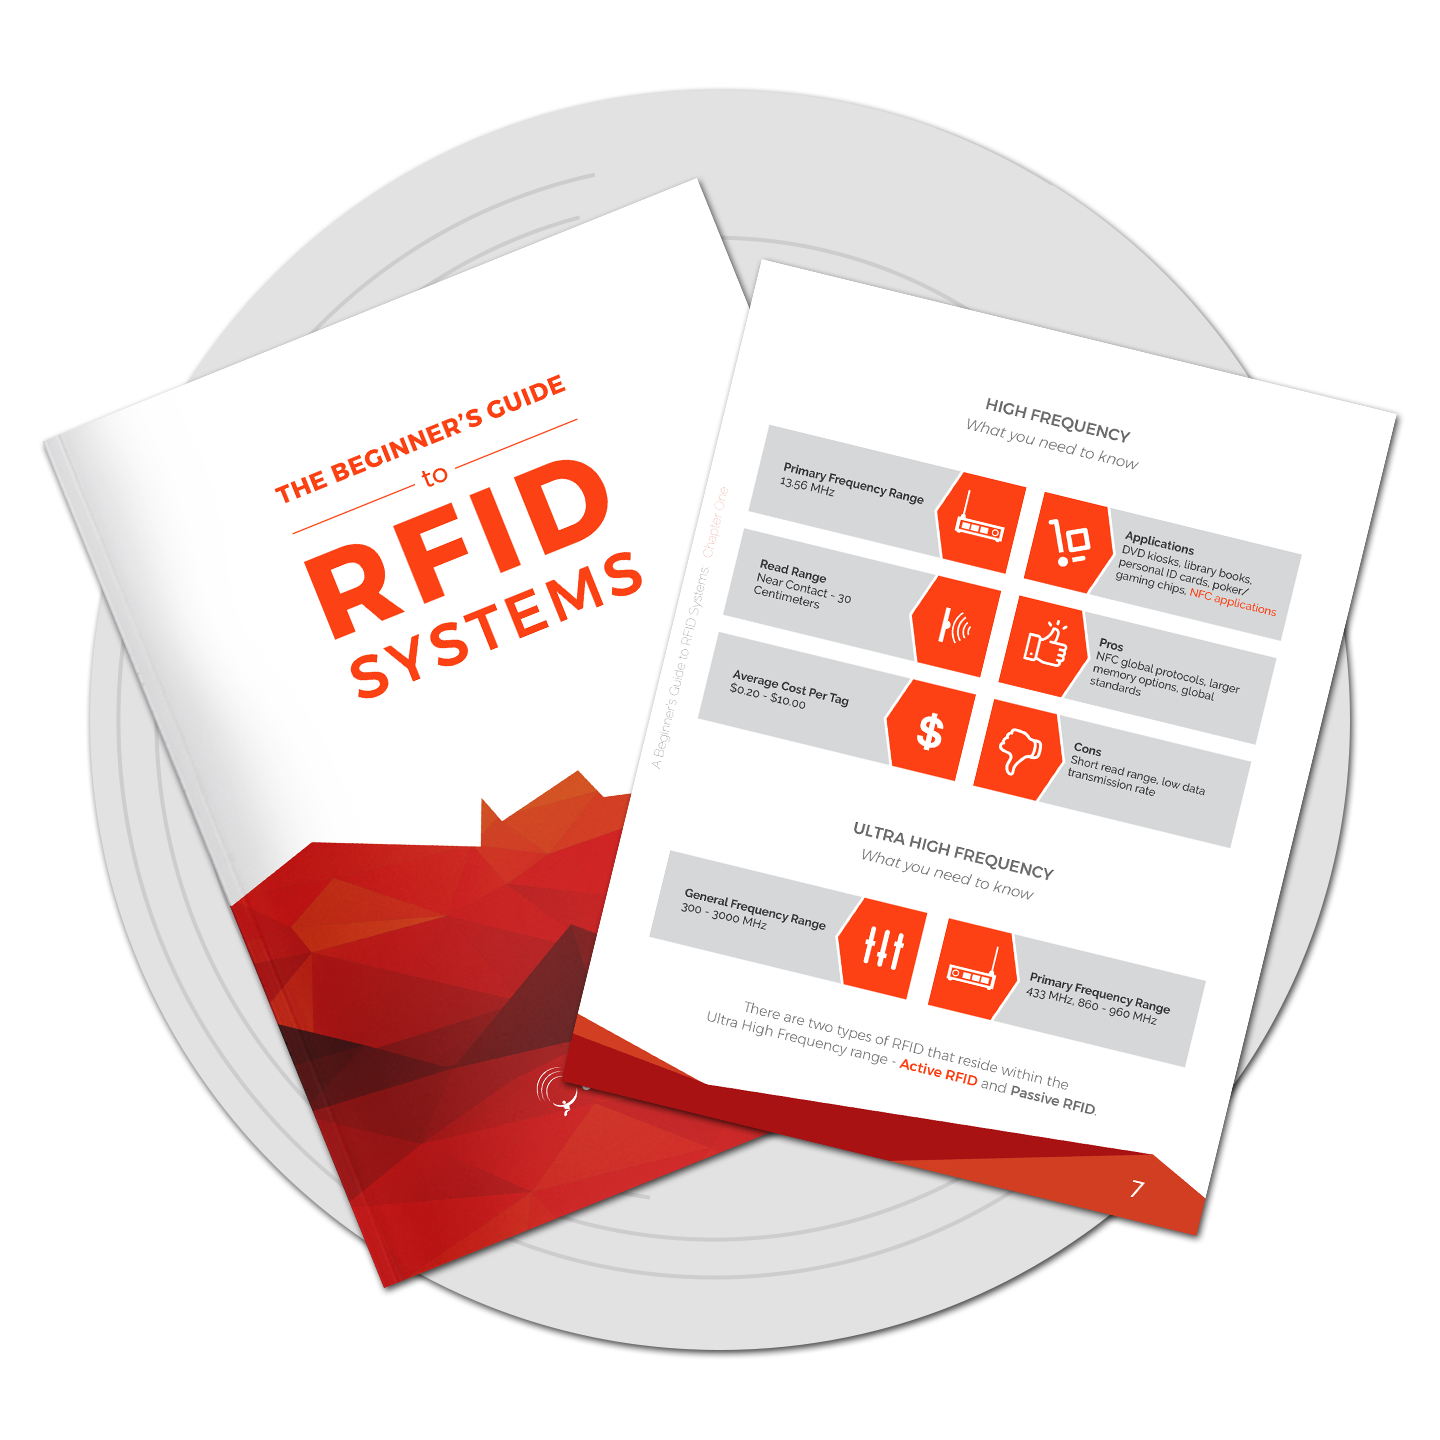 The Beginner's Guide to RFID Systems